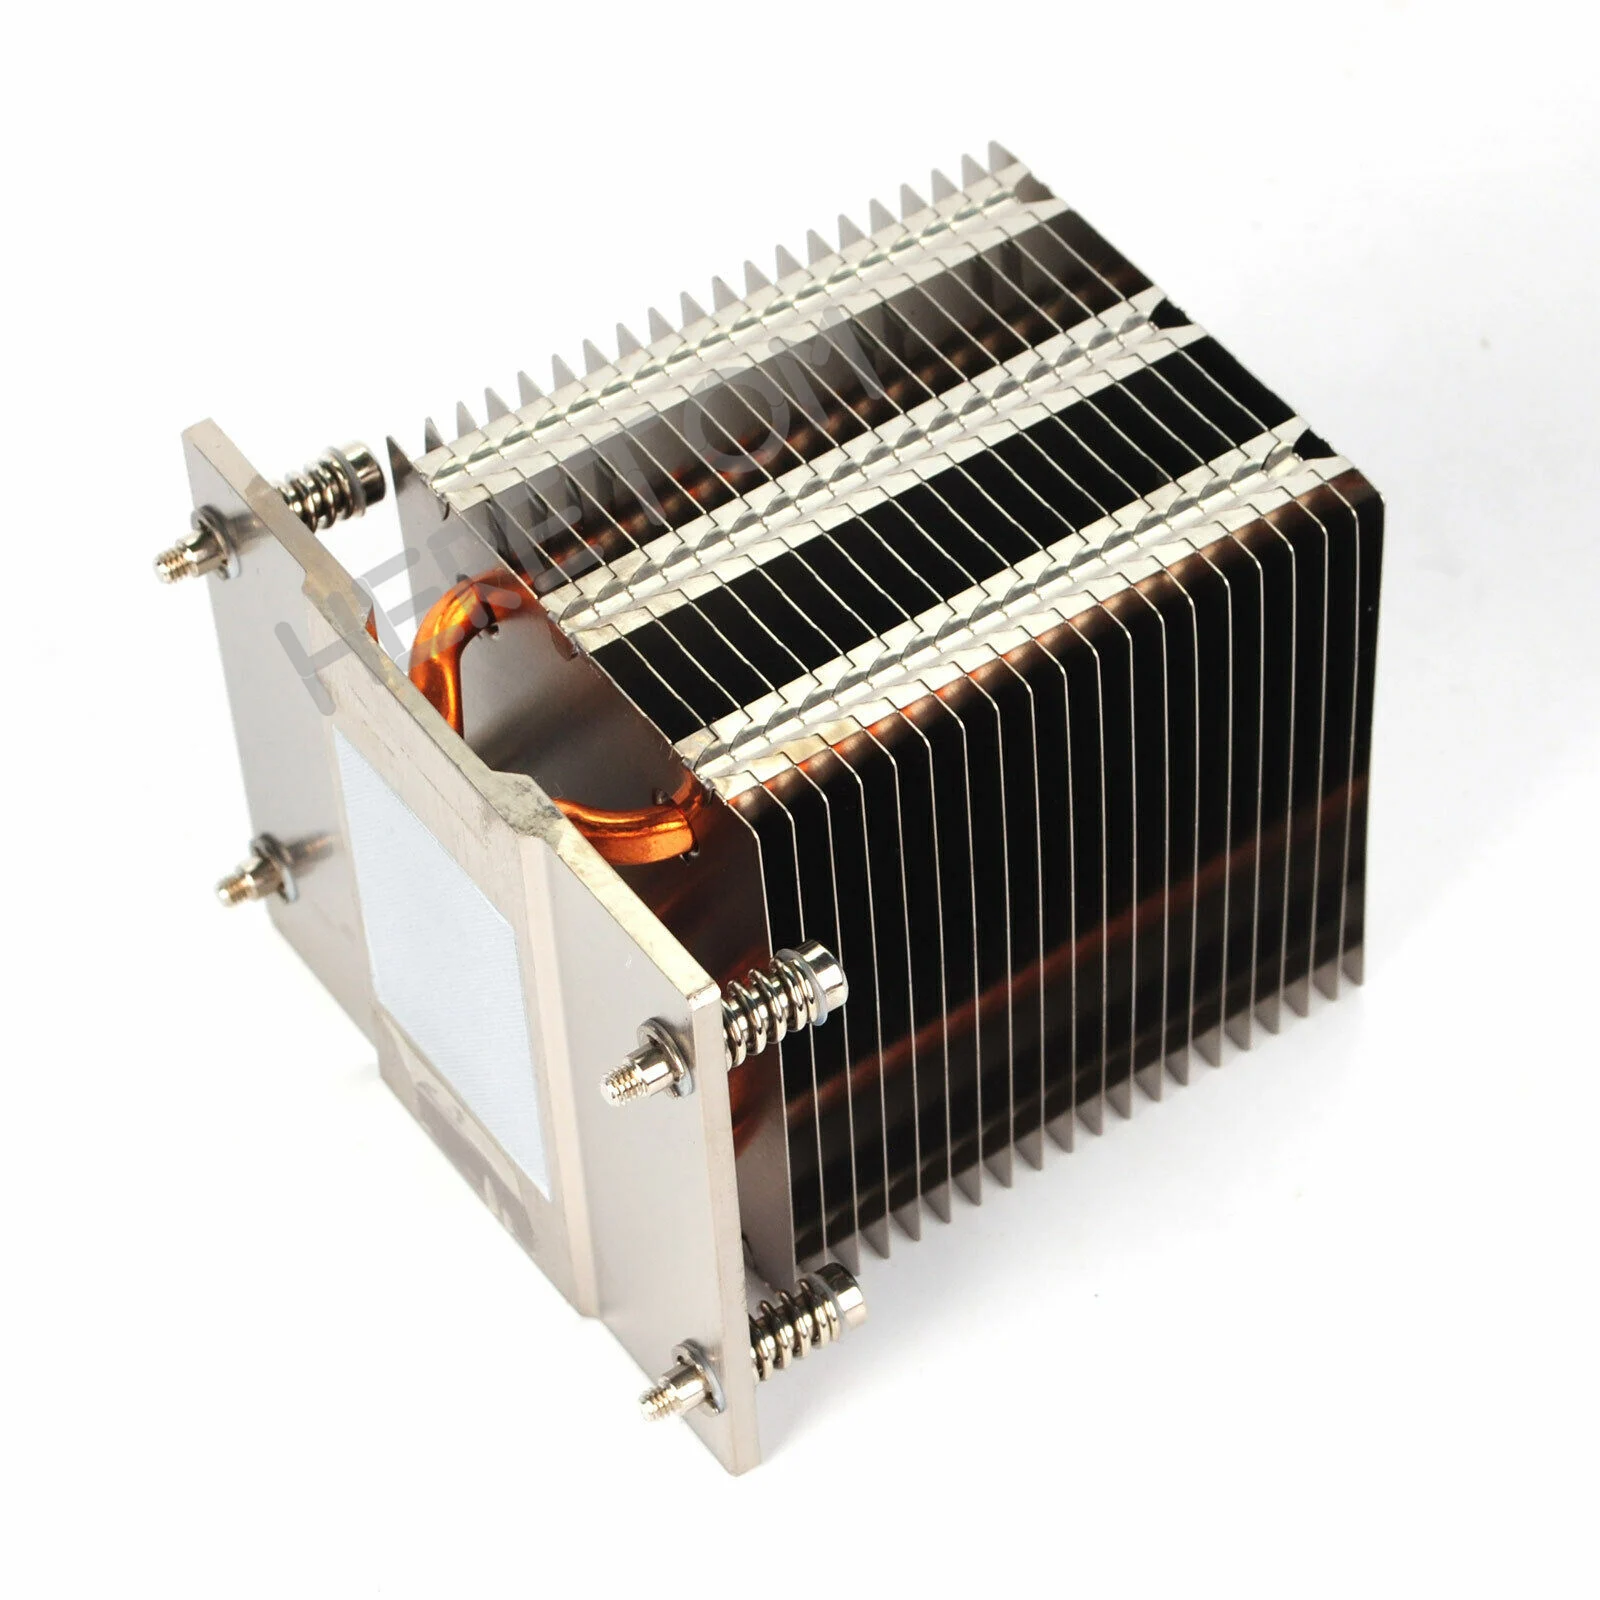 

New T430 CPU Heatsink 0WC4DX WC4DX For Dell T430 Tower Server Workstation CPU Heat sink